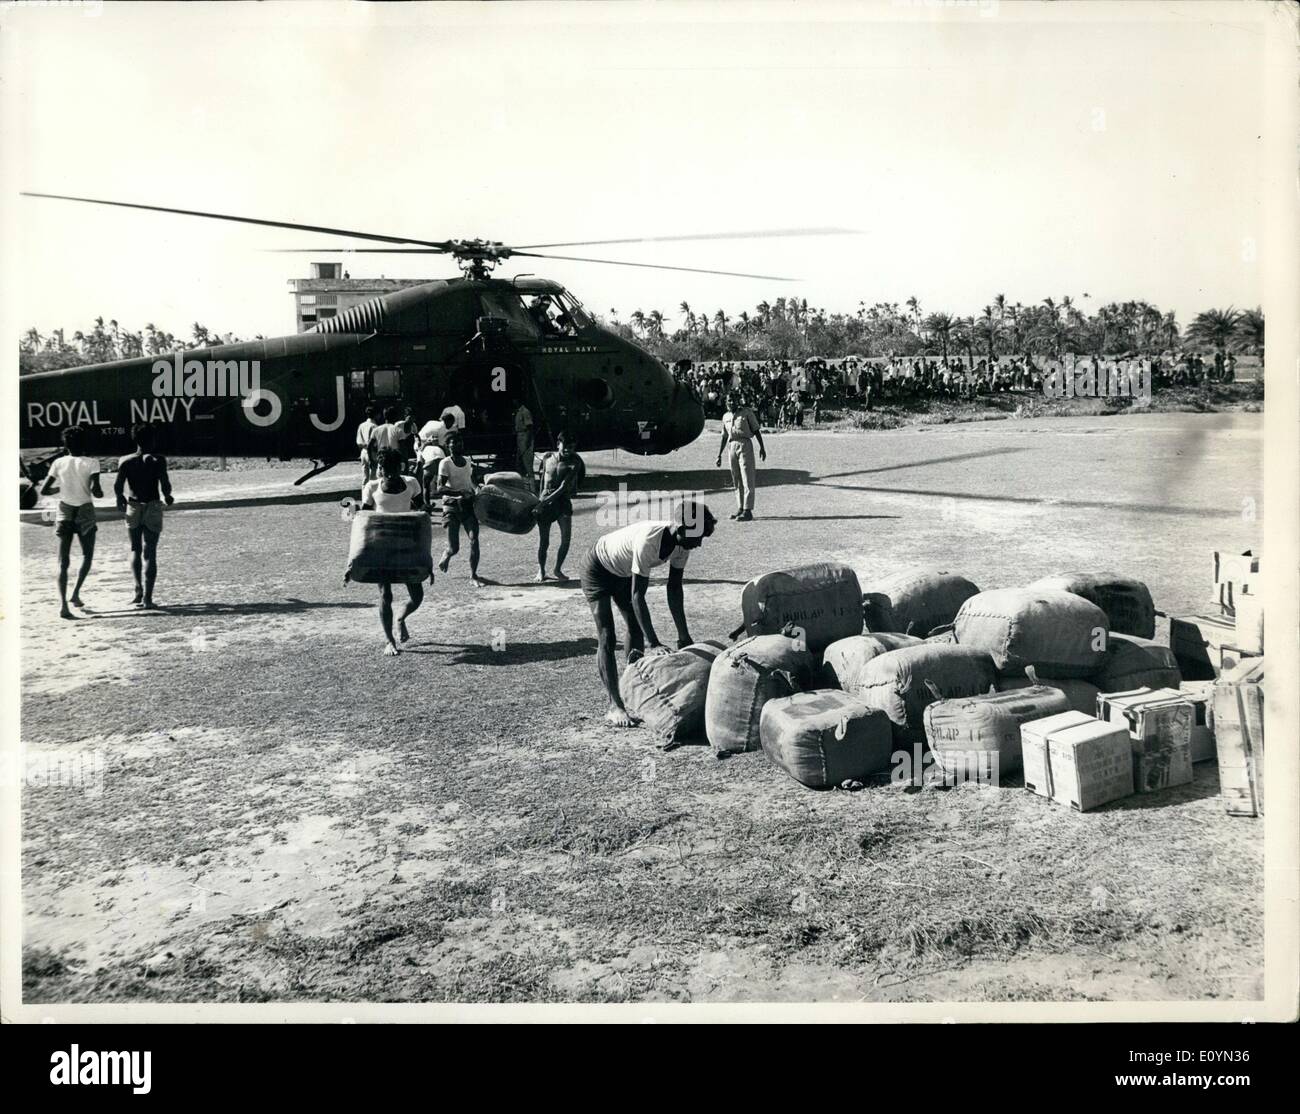 Nov. 11, 1970 - Willing Hands: Patuikhali, East Pakistan. Pakistanis were all too willing to unload stores from a helicopter from Britain's 847 Naval Air Squadron after it had landed at Patuikhali with relief supplies for survivors of East Pakistan's cyclone disaster. The helicopter flew in from the British assault ship Intrepid, one of the four-vessel British combined services task force which anchored in the Bay of Bengal, November 245th, to begin operation Burlap for the relief of the cyclone survivors. Stock Photo